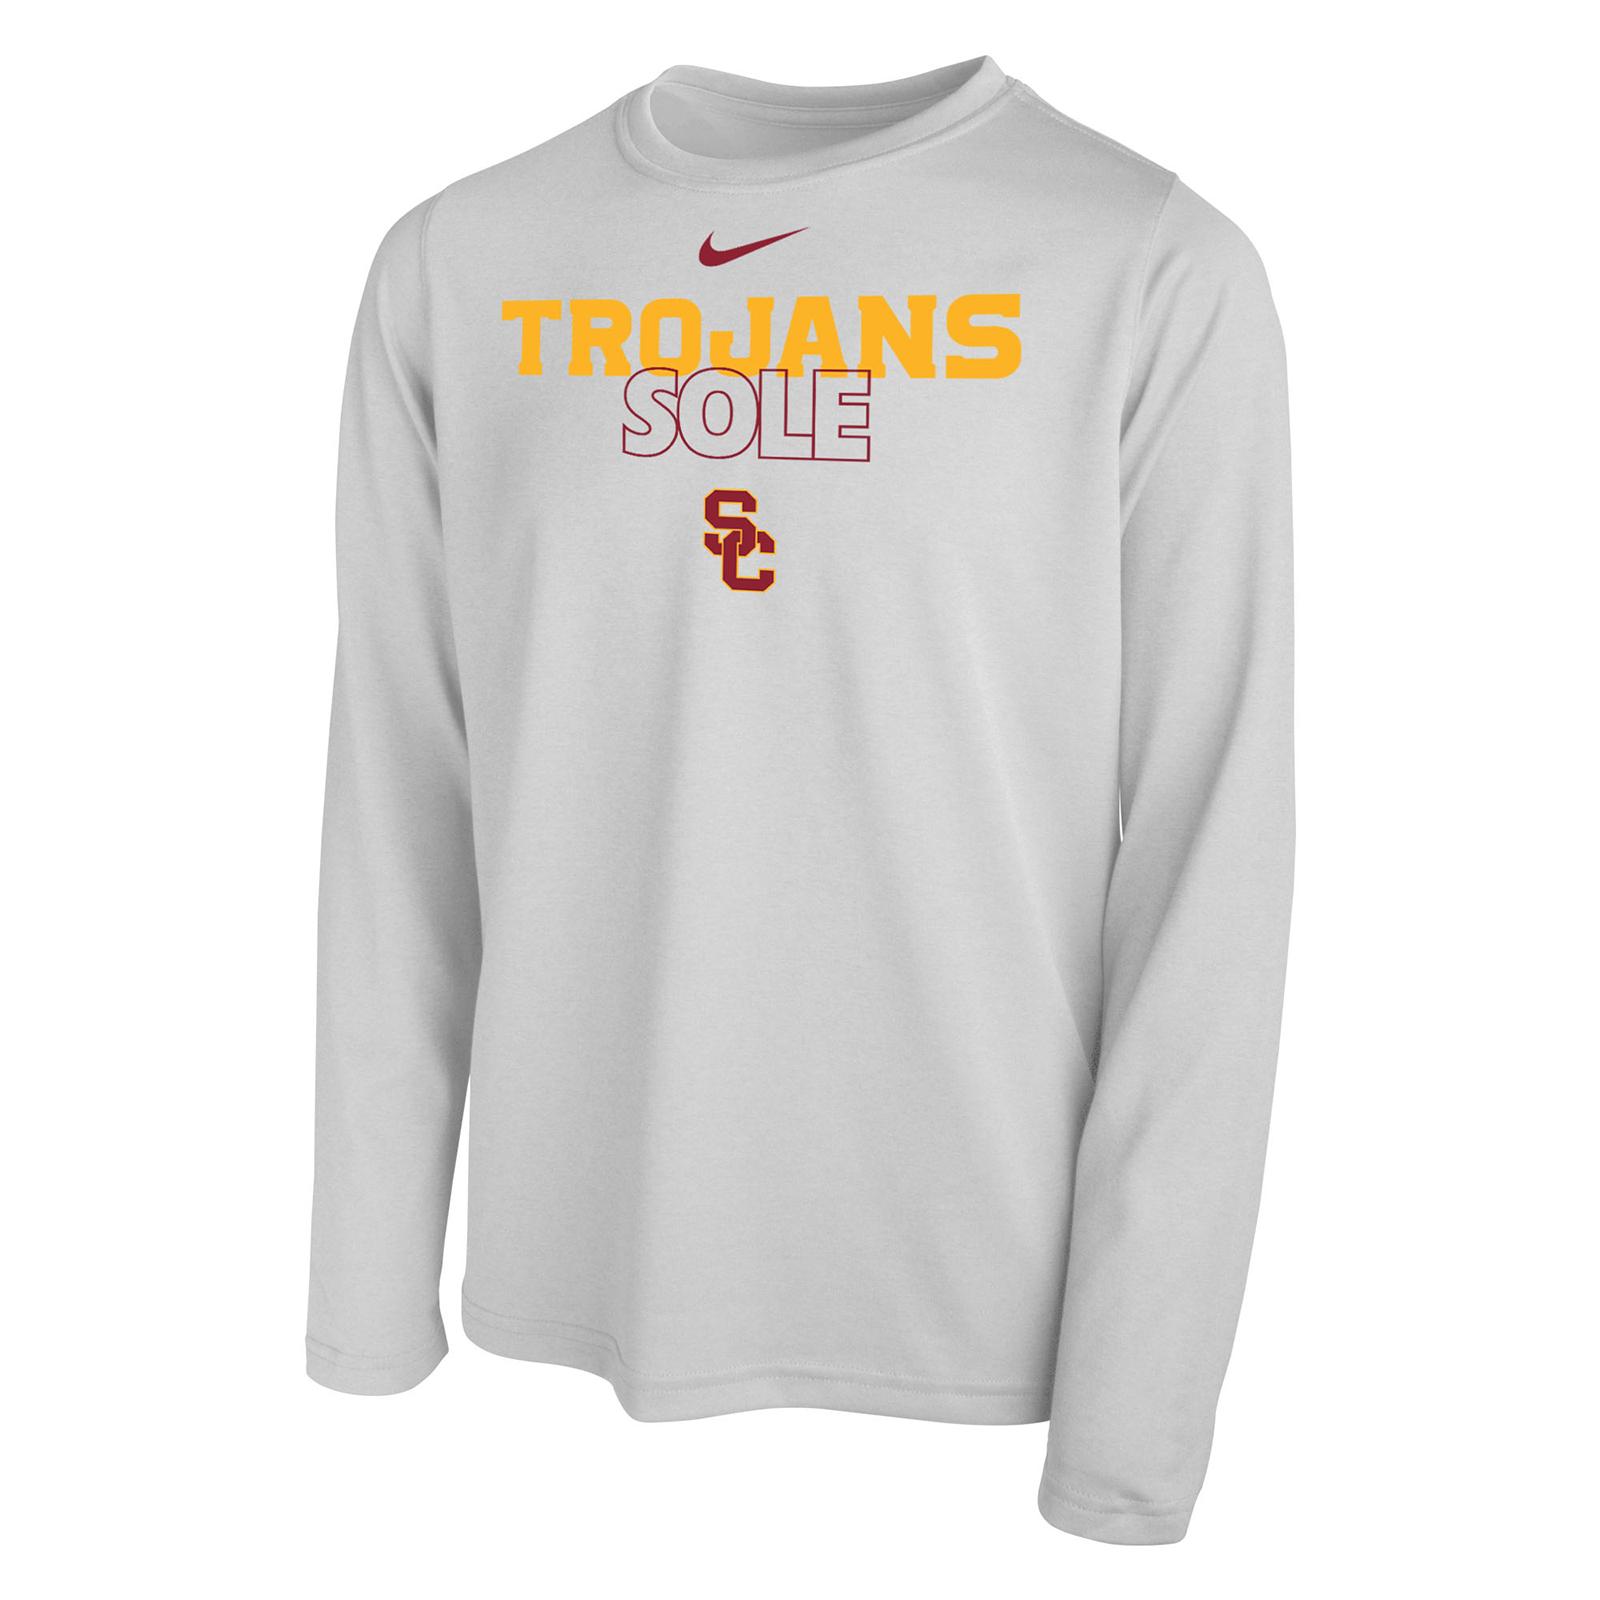 USC Trojans Sole Youth Bench LS Tee SP23 image01